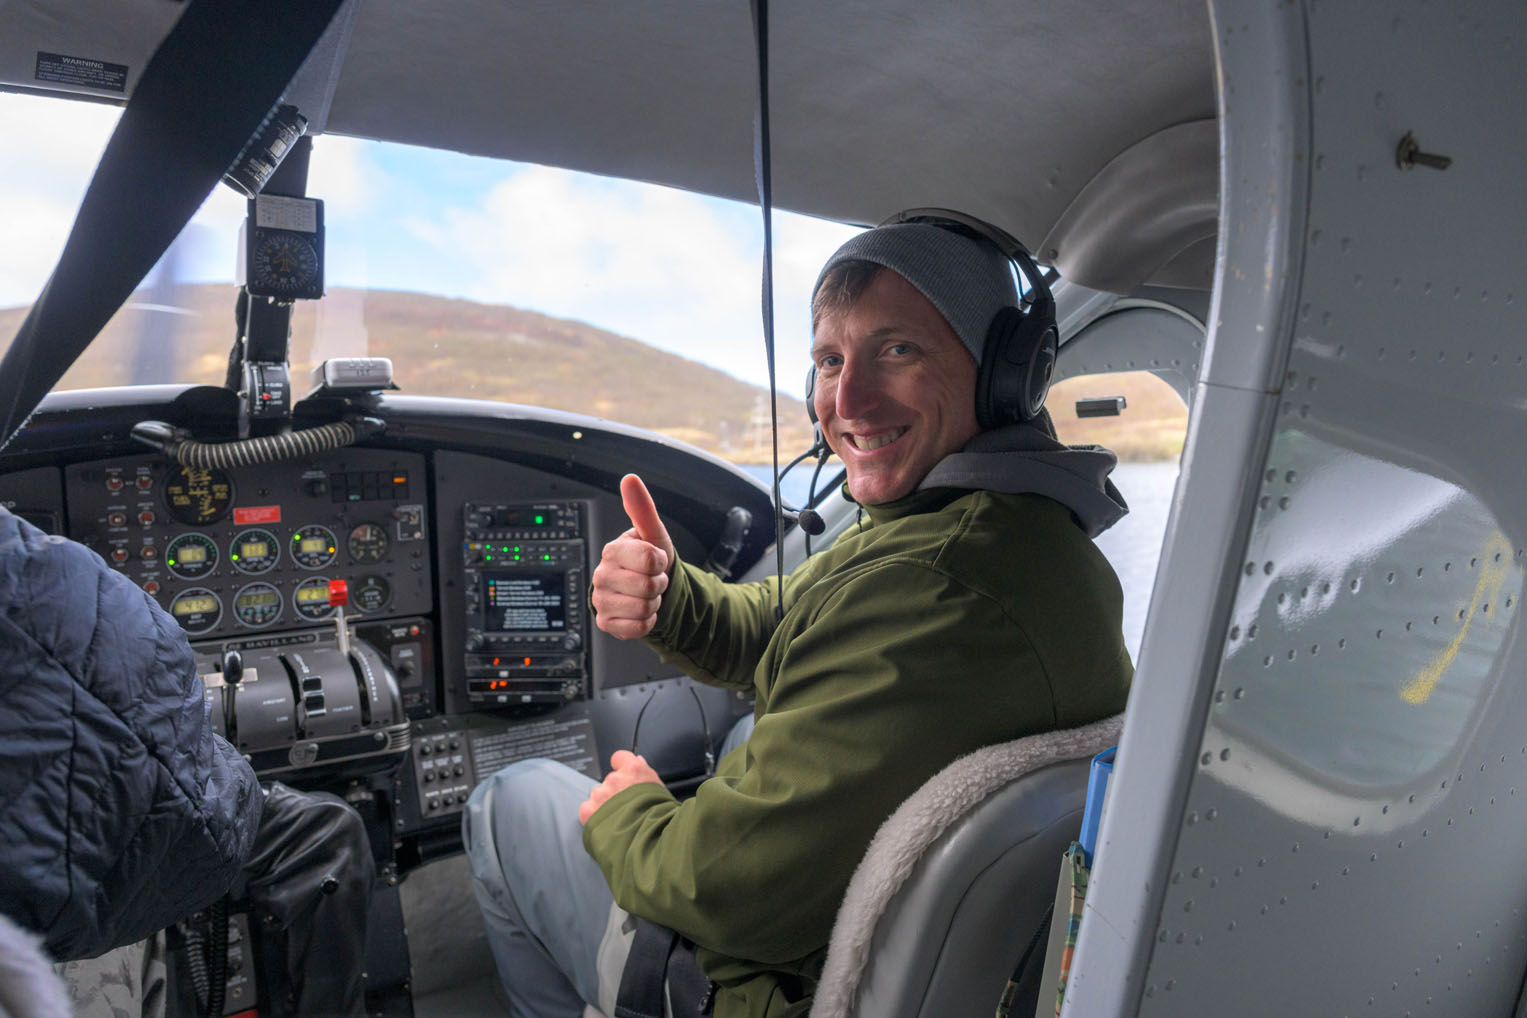 Chad got a front-row seat on the way to visit a wilderness fishing spot in Lake Clark National Park.